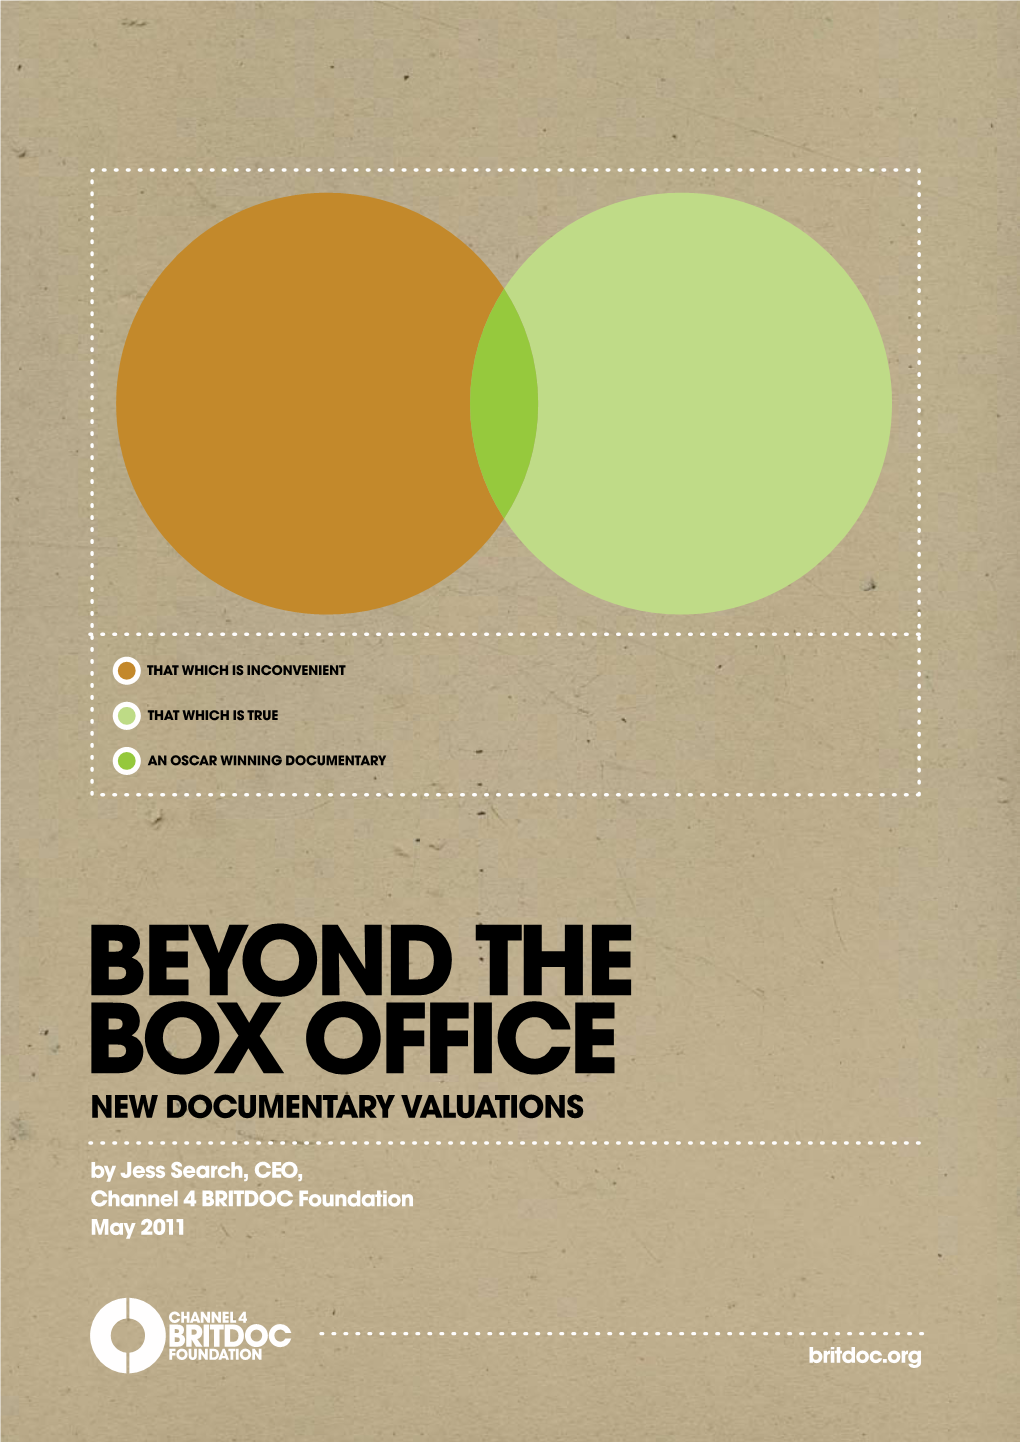 Beyond the Box Office New Documentary Valuations